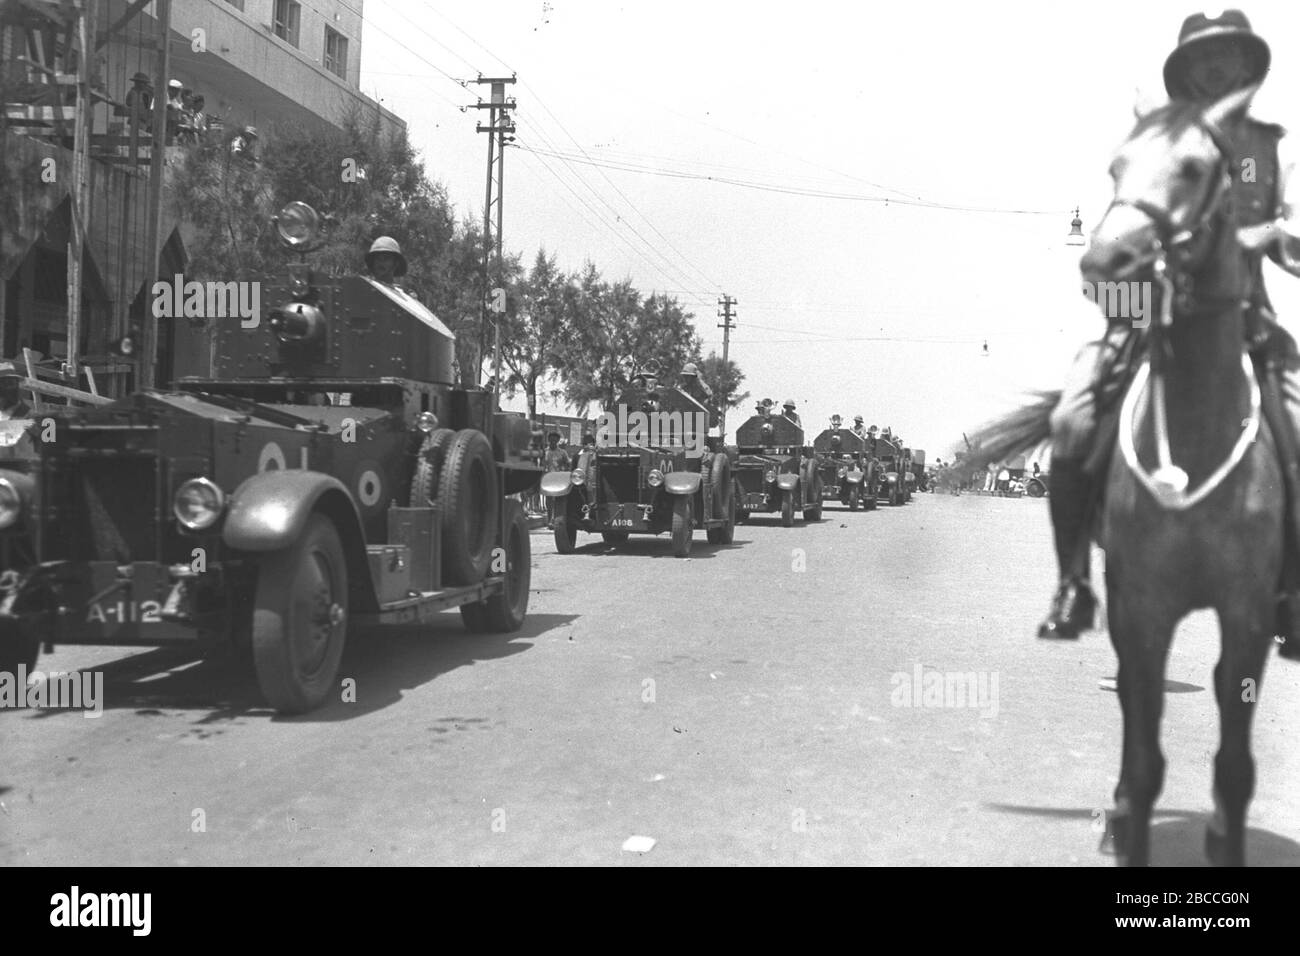 English British Armoured Vehicles Parading Through Allenby Street In Tel Aviv In Honor Of The Silver Jubilee Of King George V O O O U O U E O O O O U E O E O U U C I O O O U U C O U E U